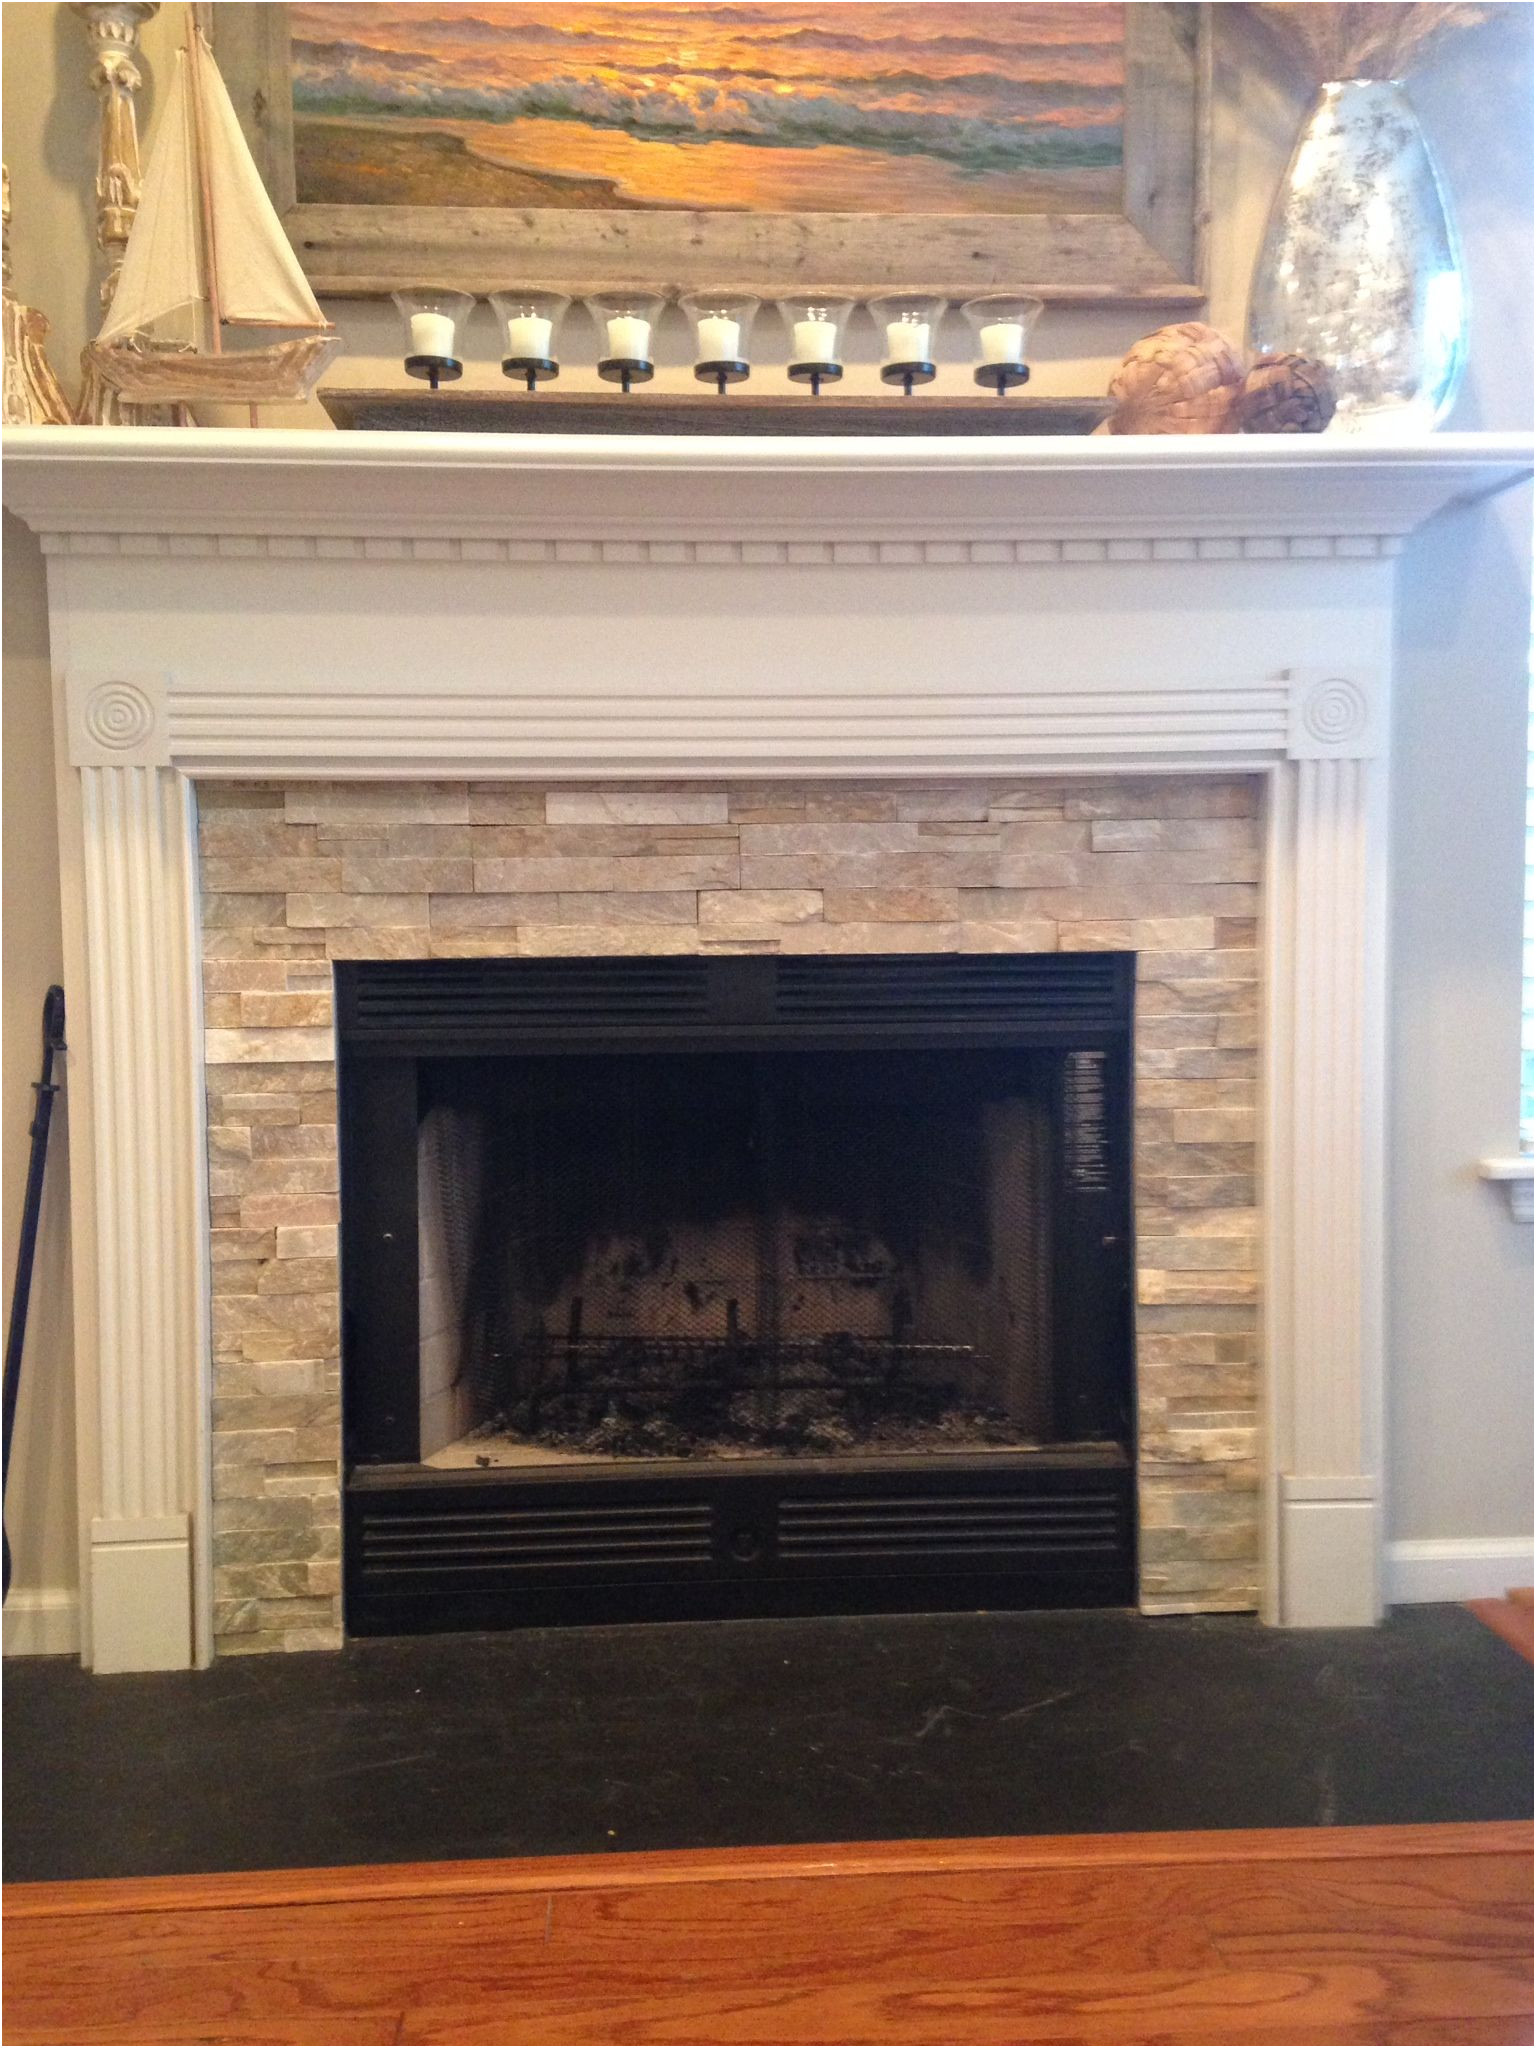 New Fireplace Tile Ideas Pictures